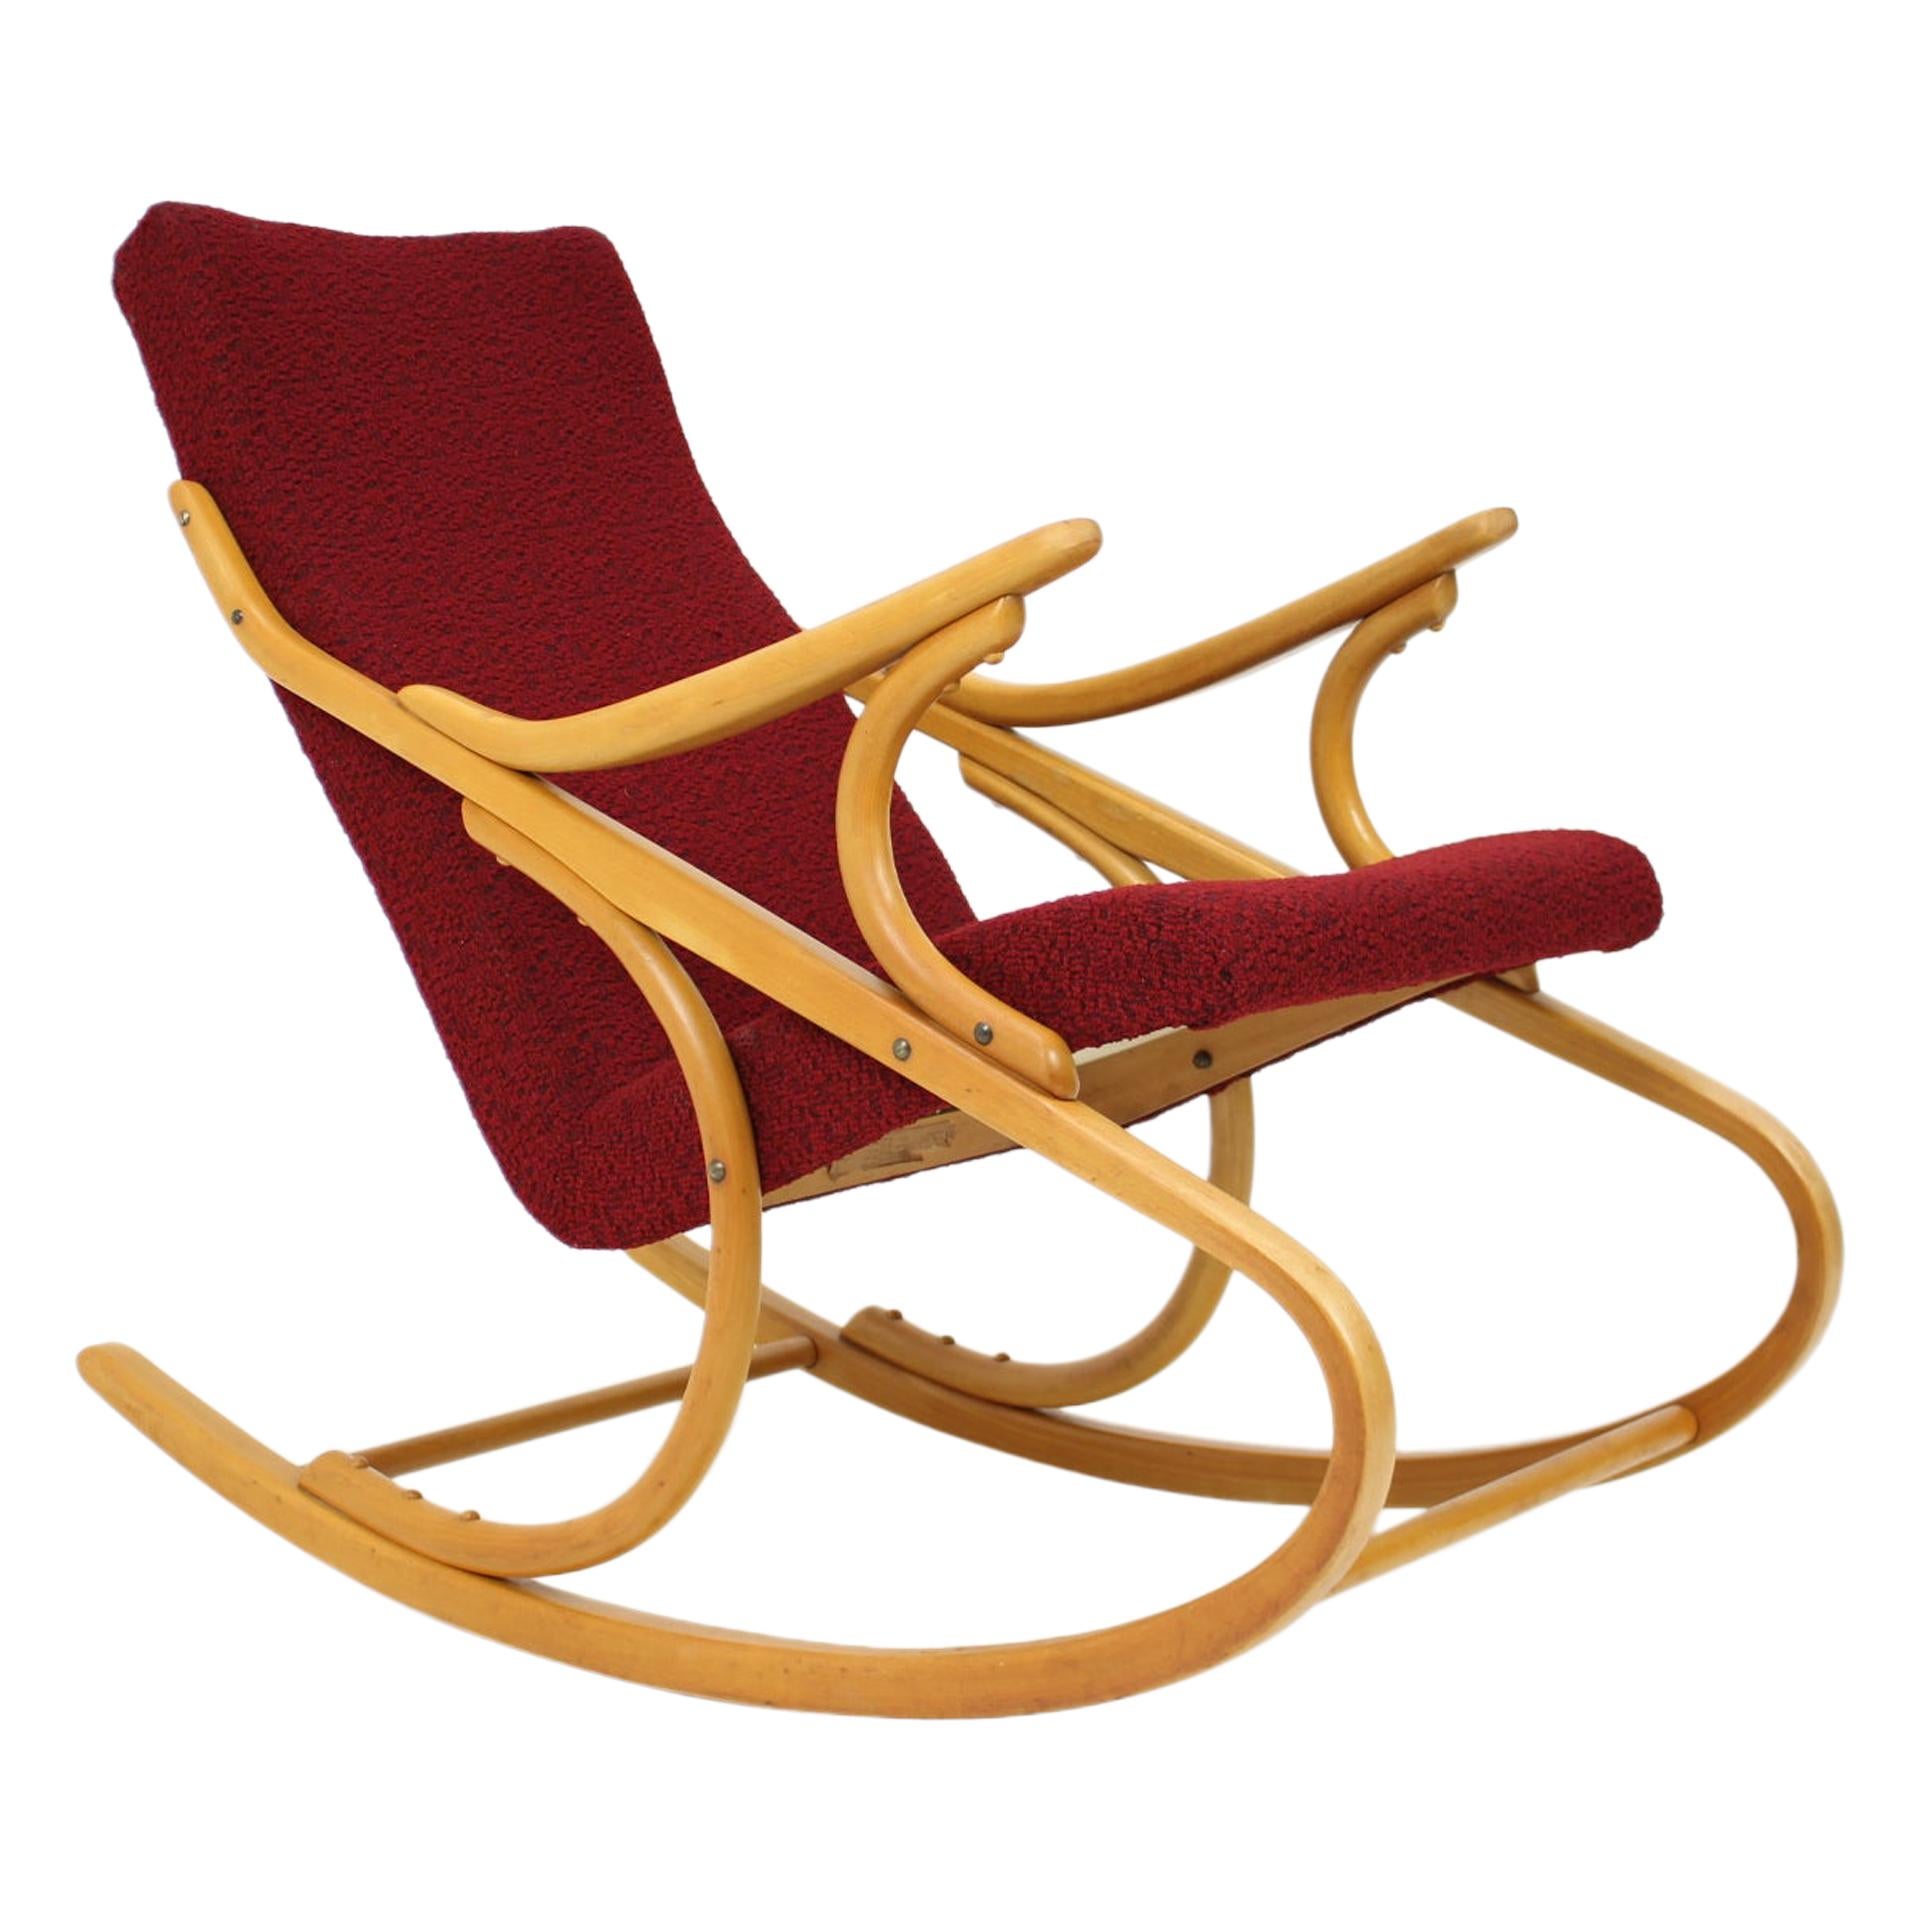 Iconic Midcentury Design Rocking Chair / Expo, 1970 For Sale